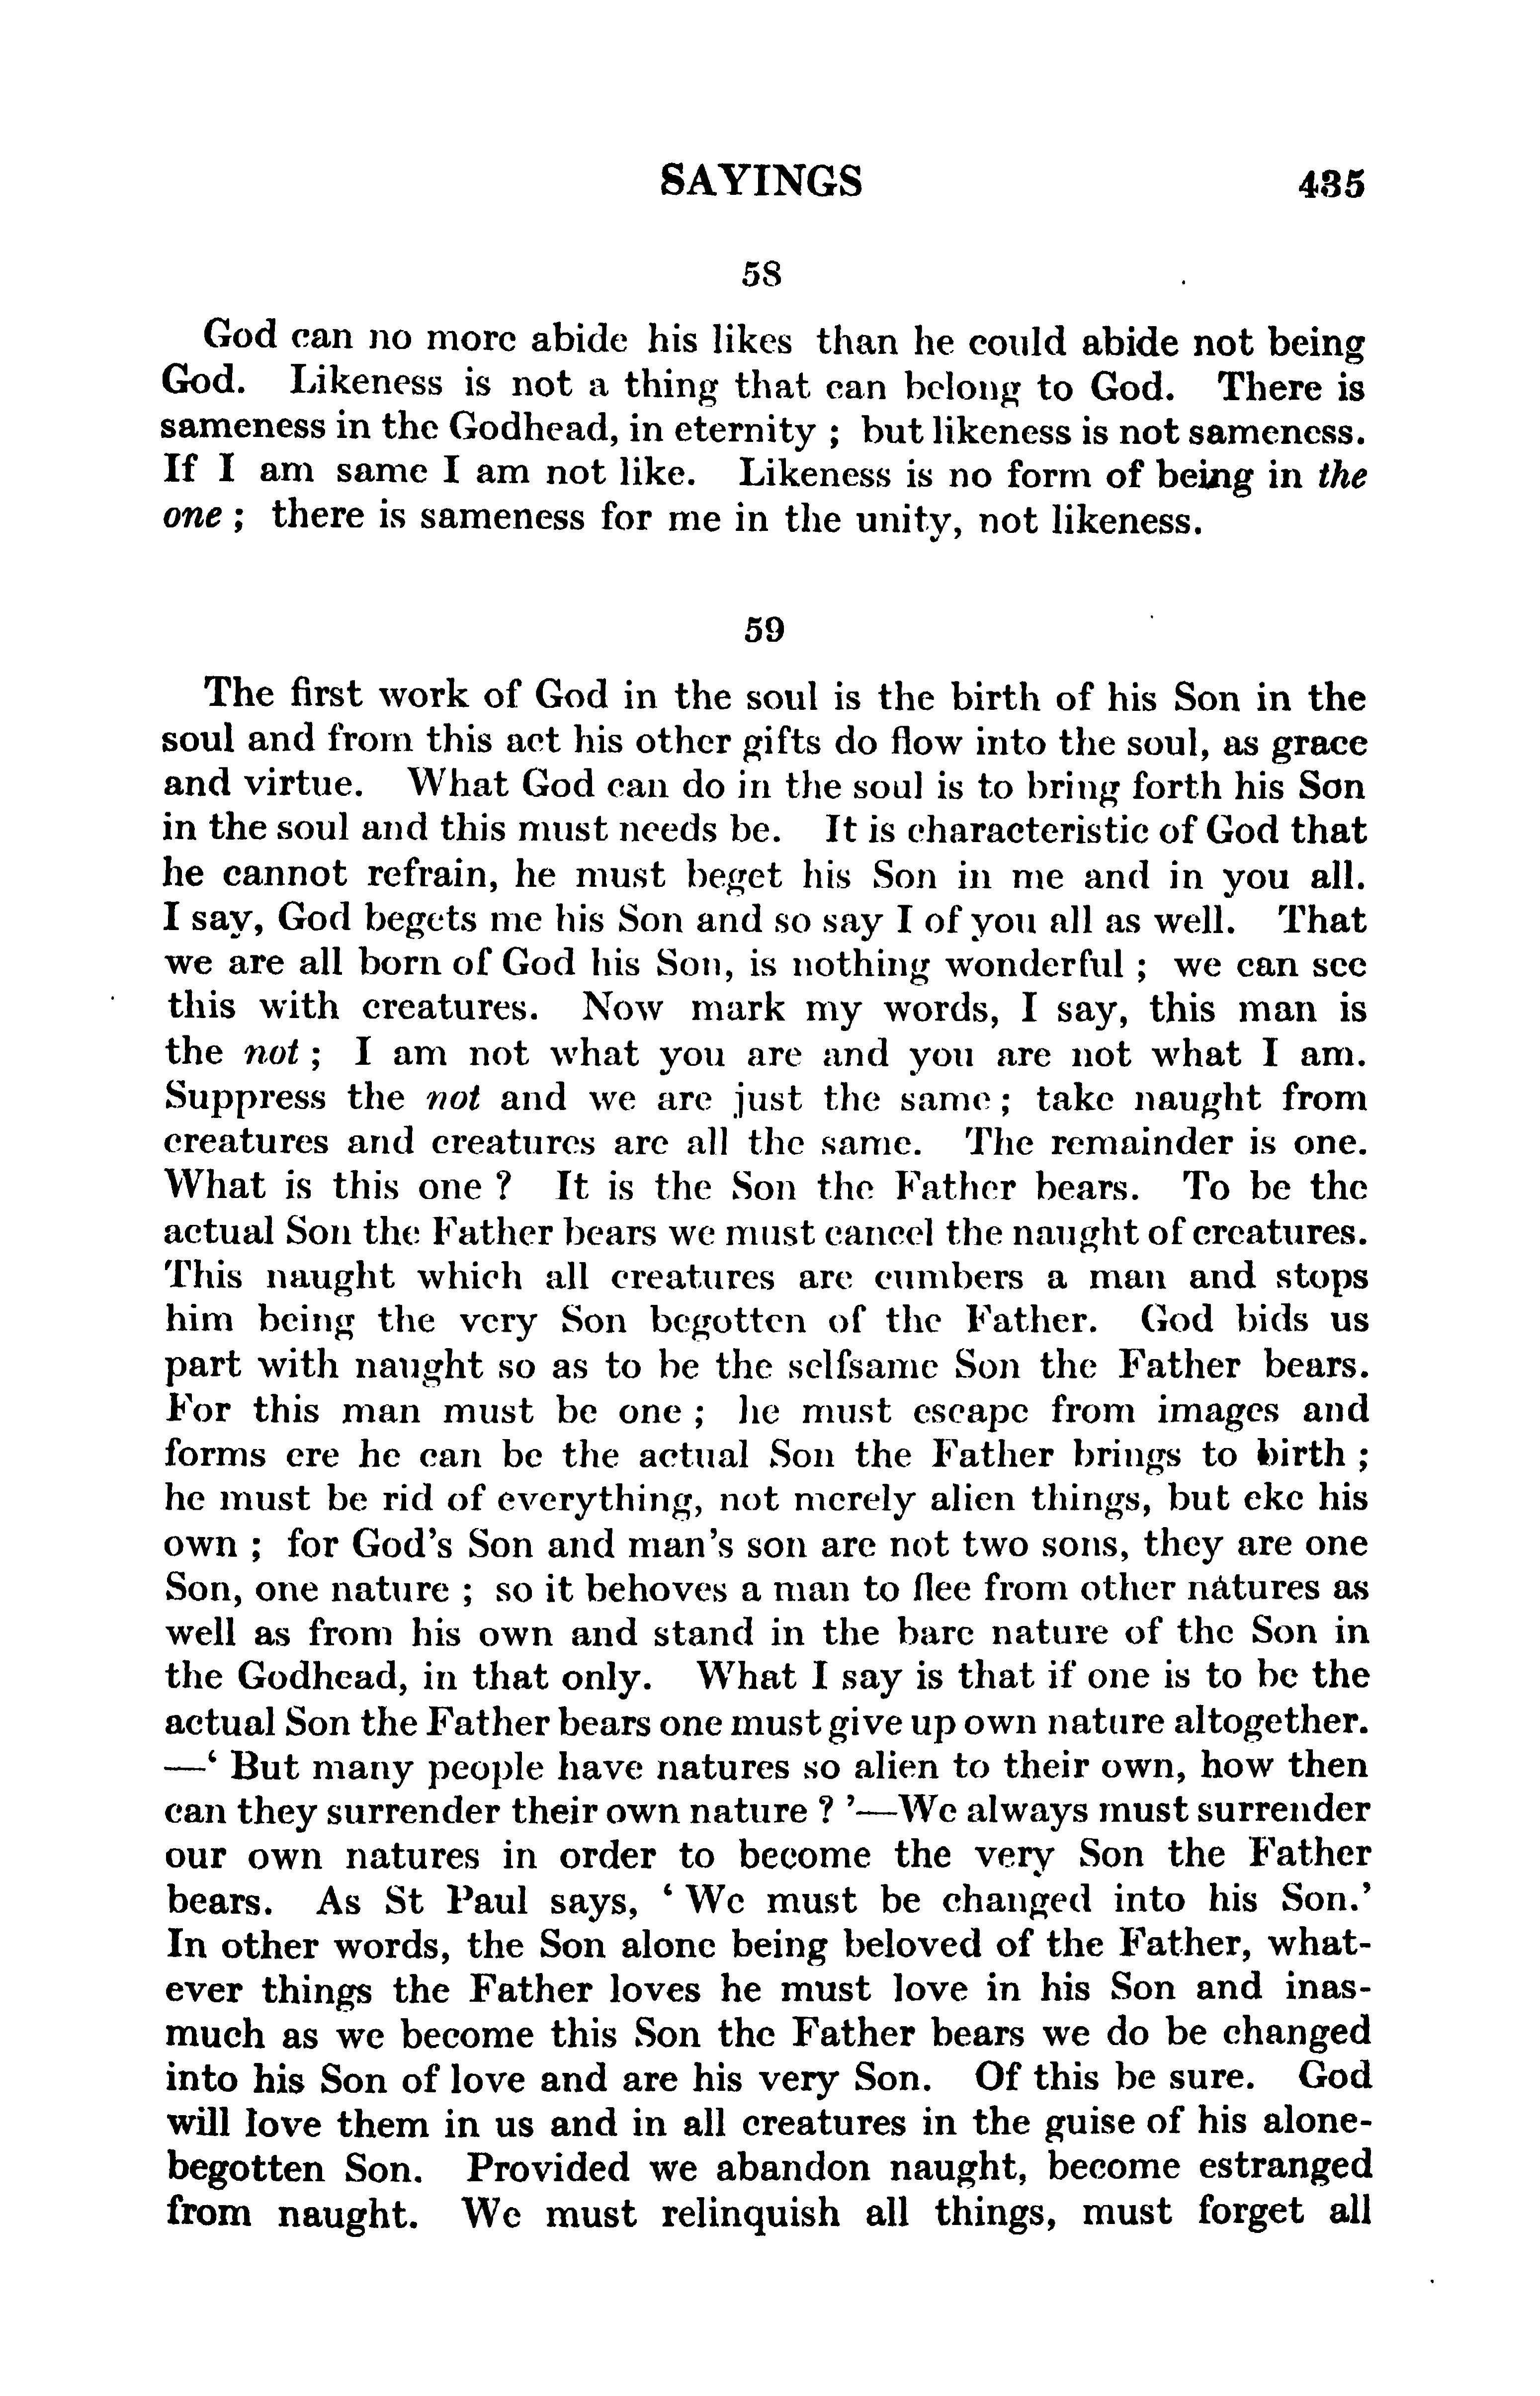 Image of page 0459